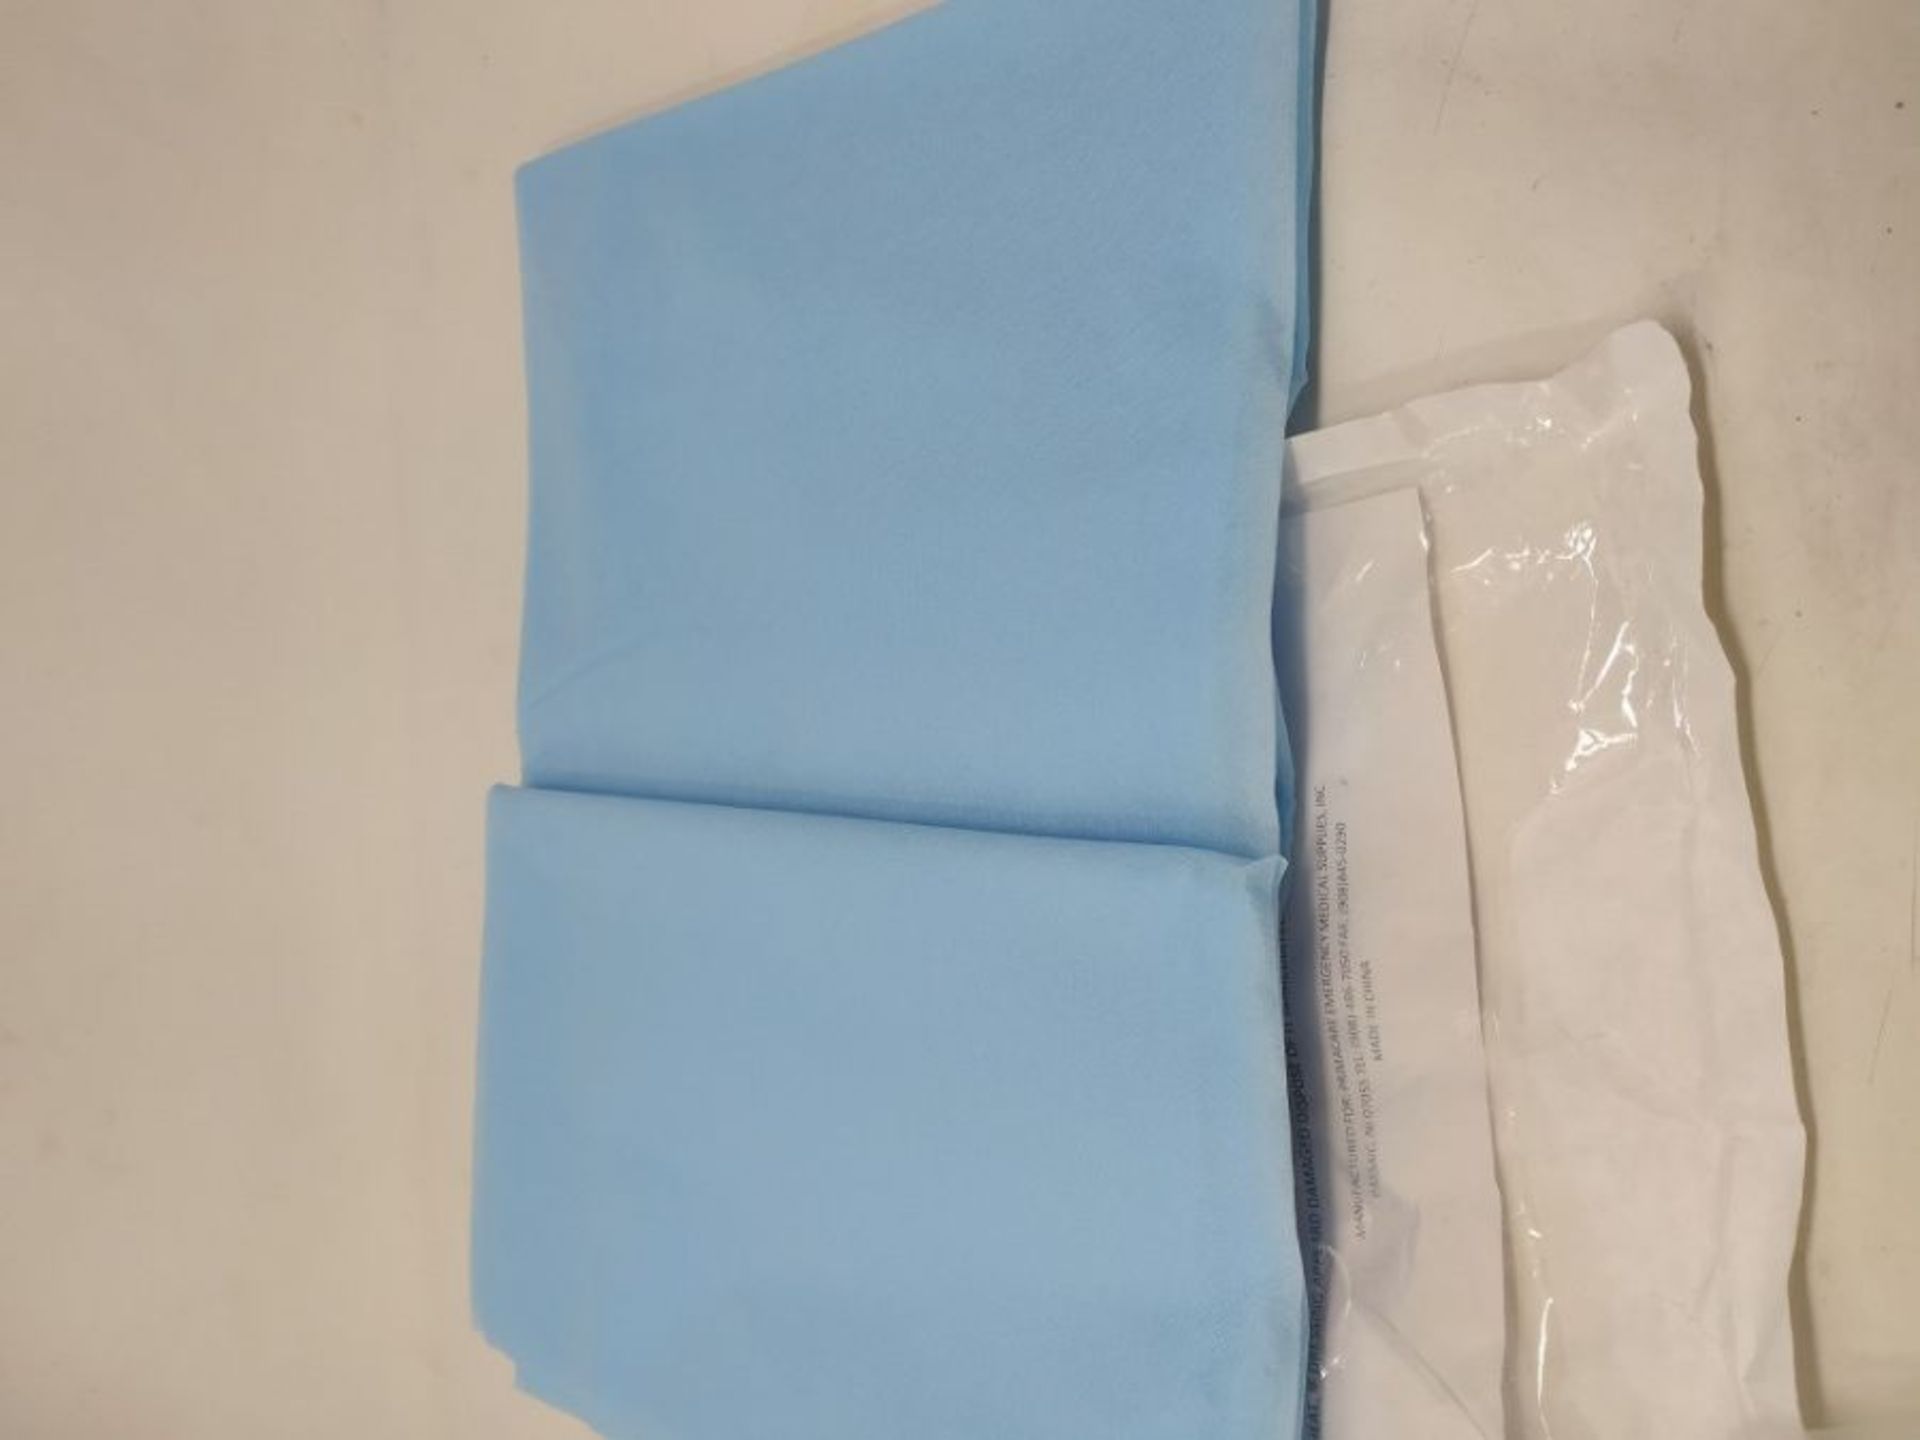 Primacare Sterile Burn Sheets with Latex Exam Gloves